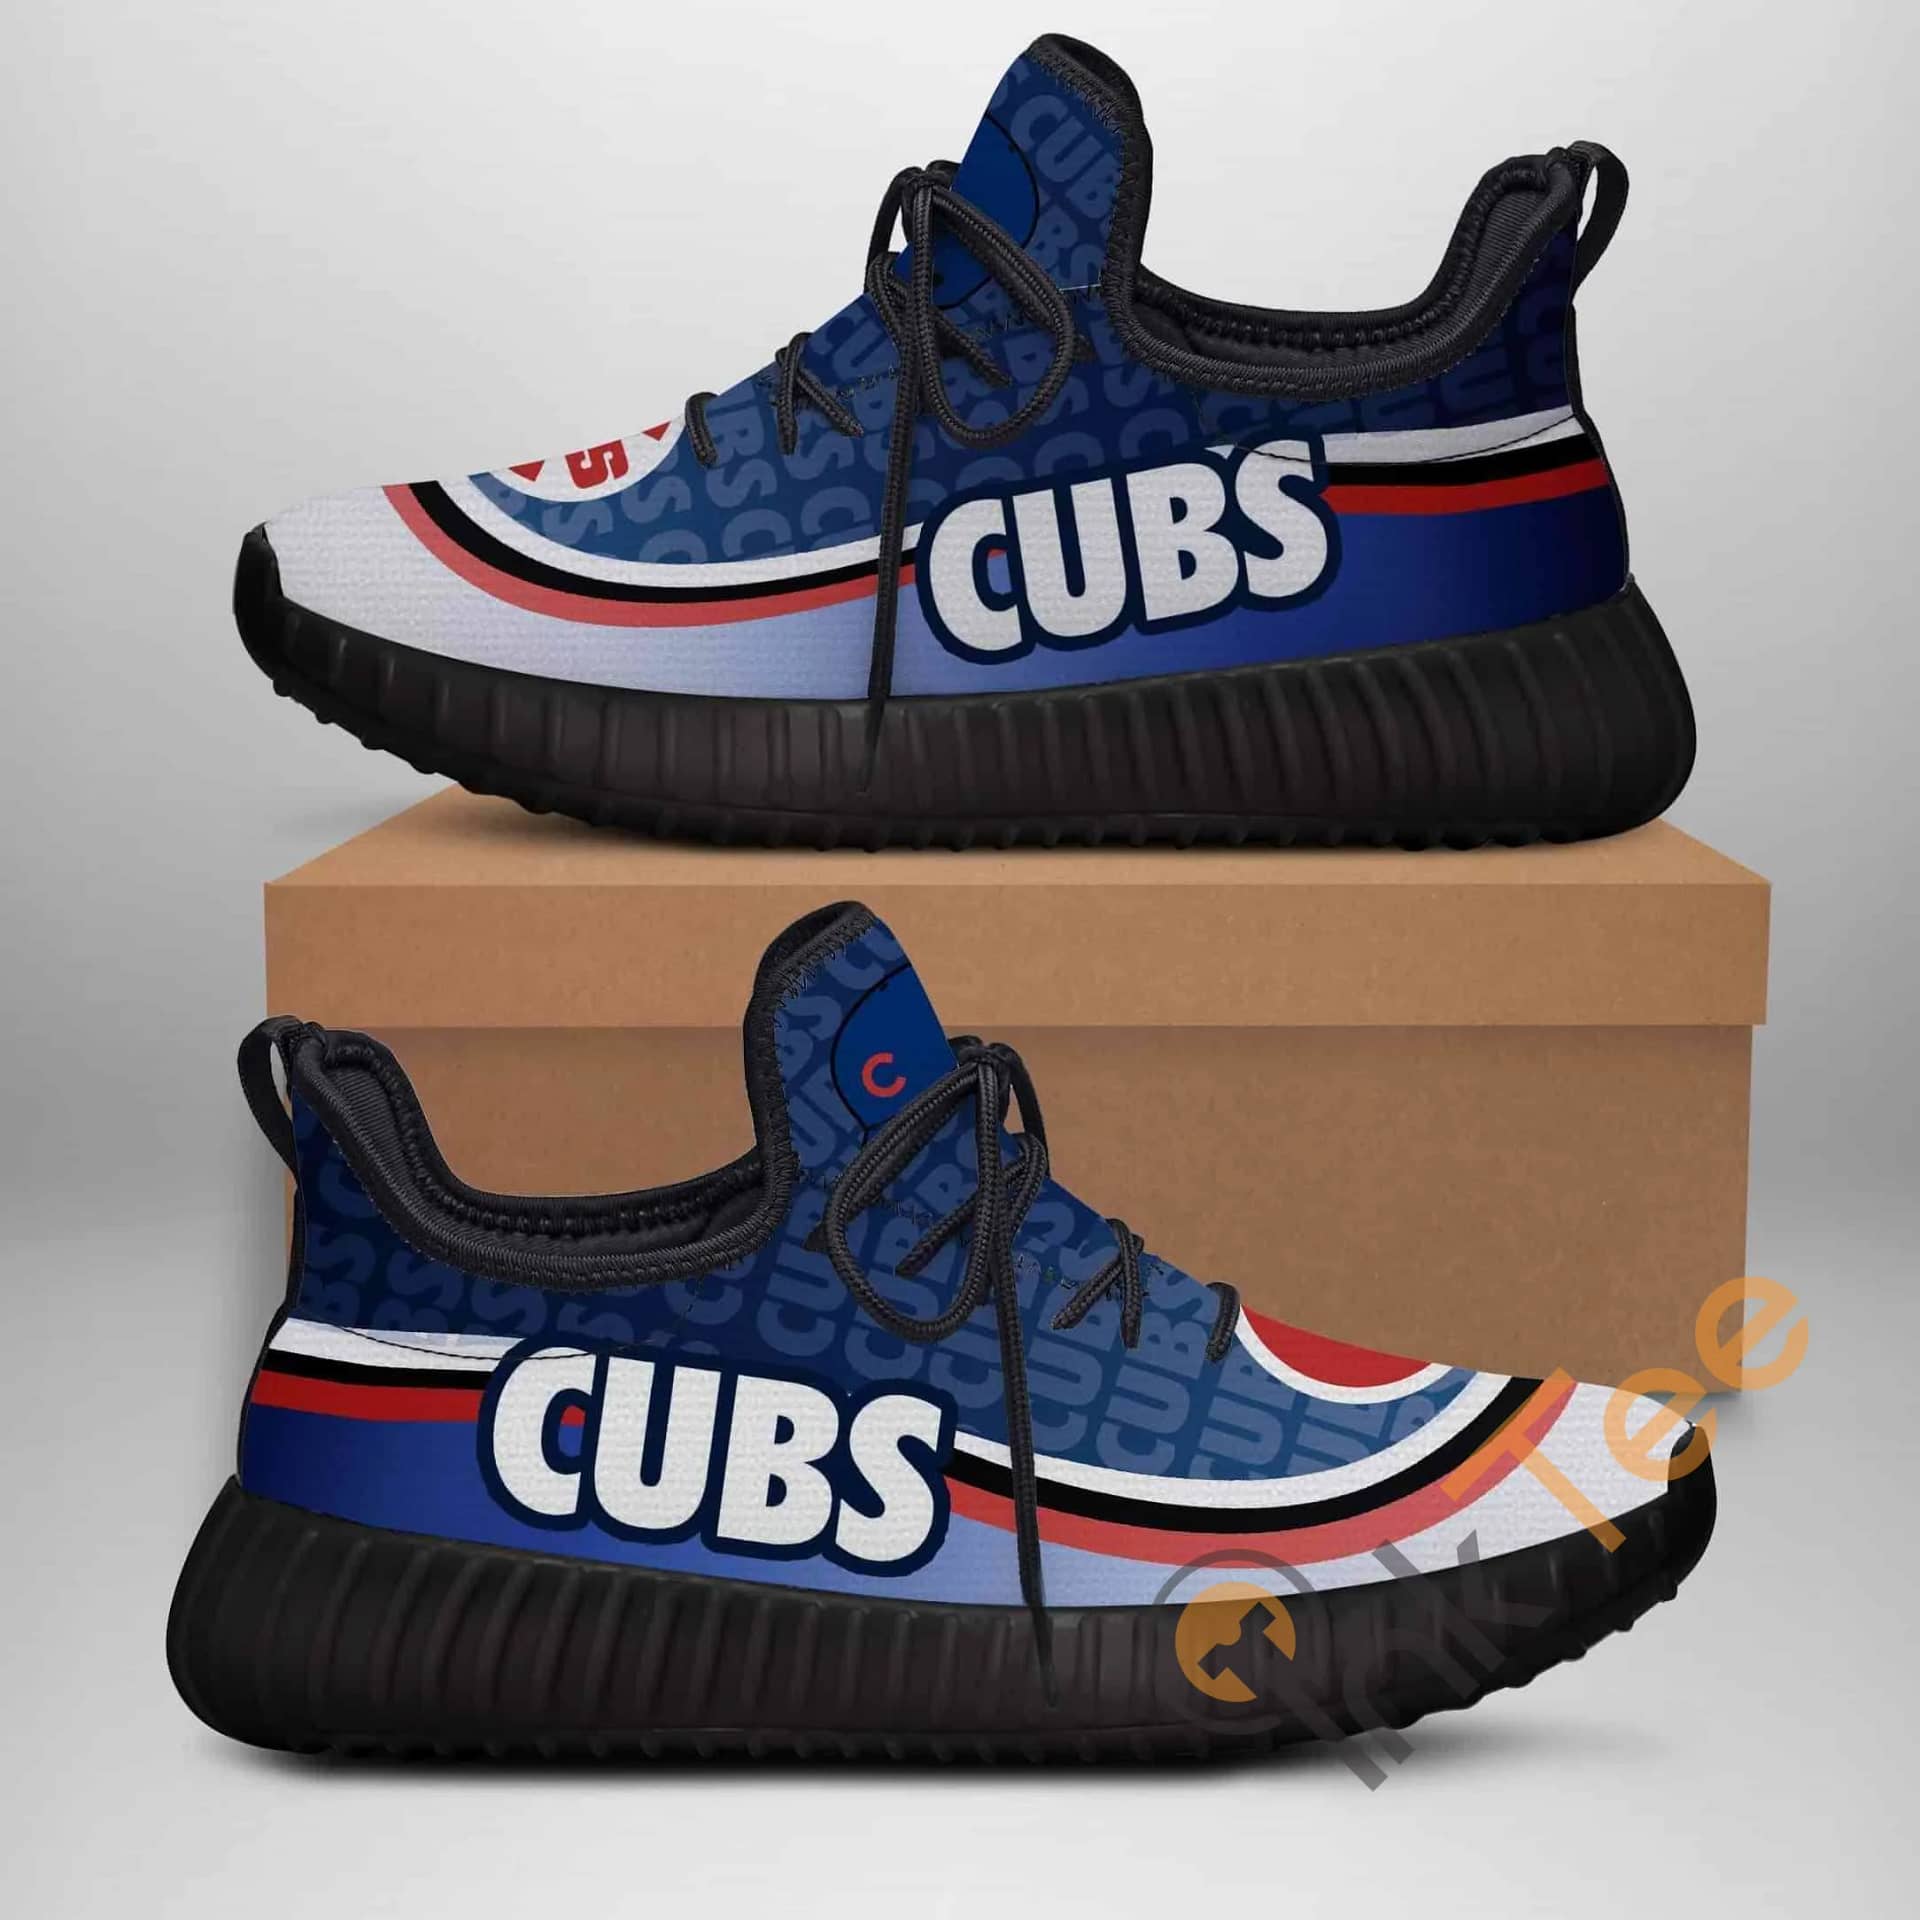 Chicago Cubs Amazon Best Selling Yeezy Boost